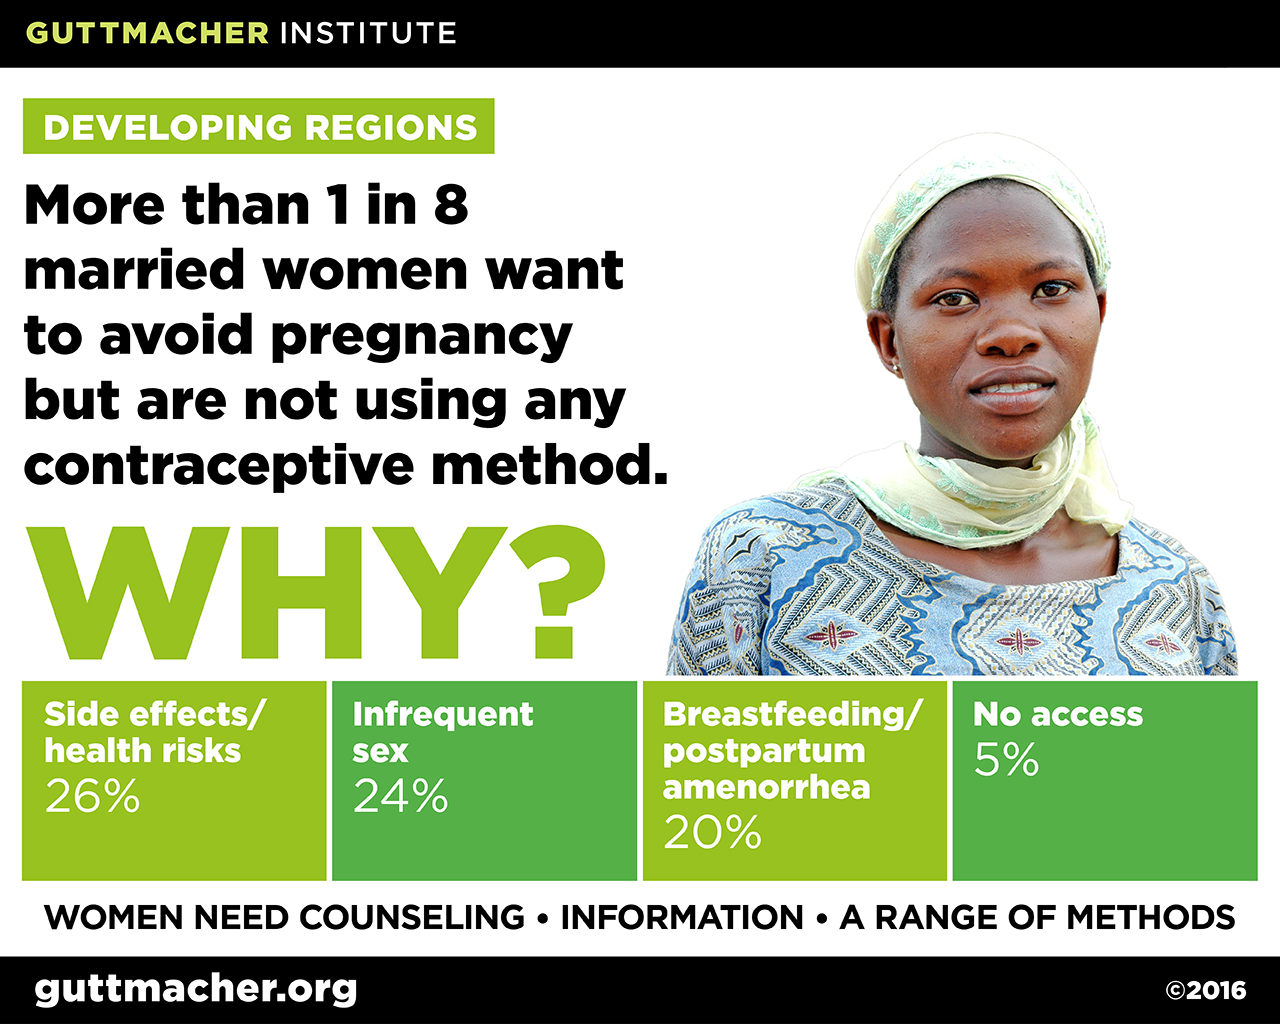 Why are married women with unmet need in developing countries not using any contraceptive method? Guttmacher Institute picture